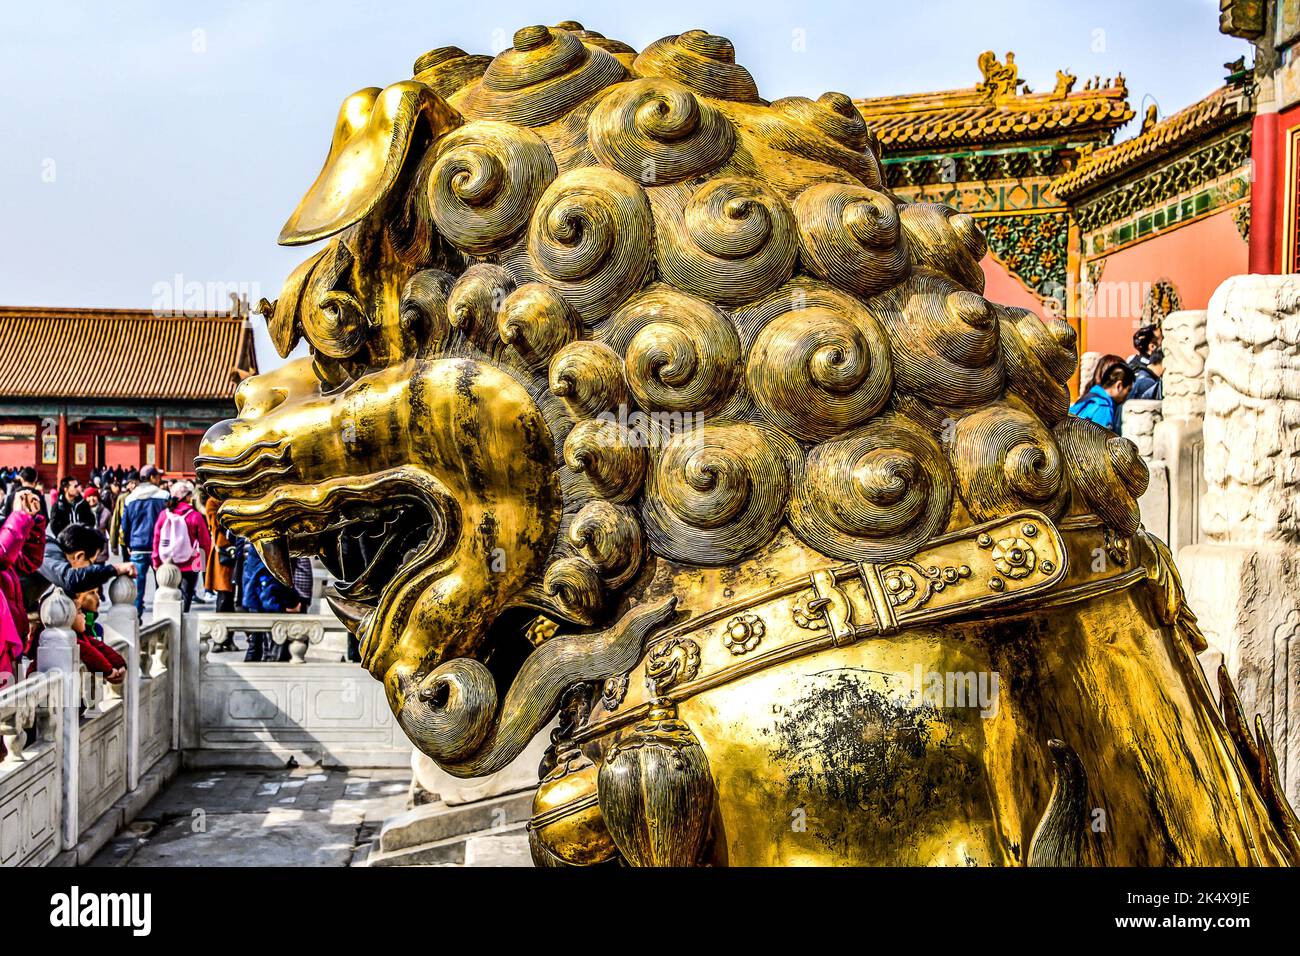 24.02.2019 Bejing China - Golden Lion Head The Forbidden City is the Chinese imperial palace from the Ming Dynasty. Stock Photo